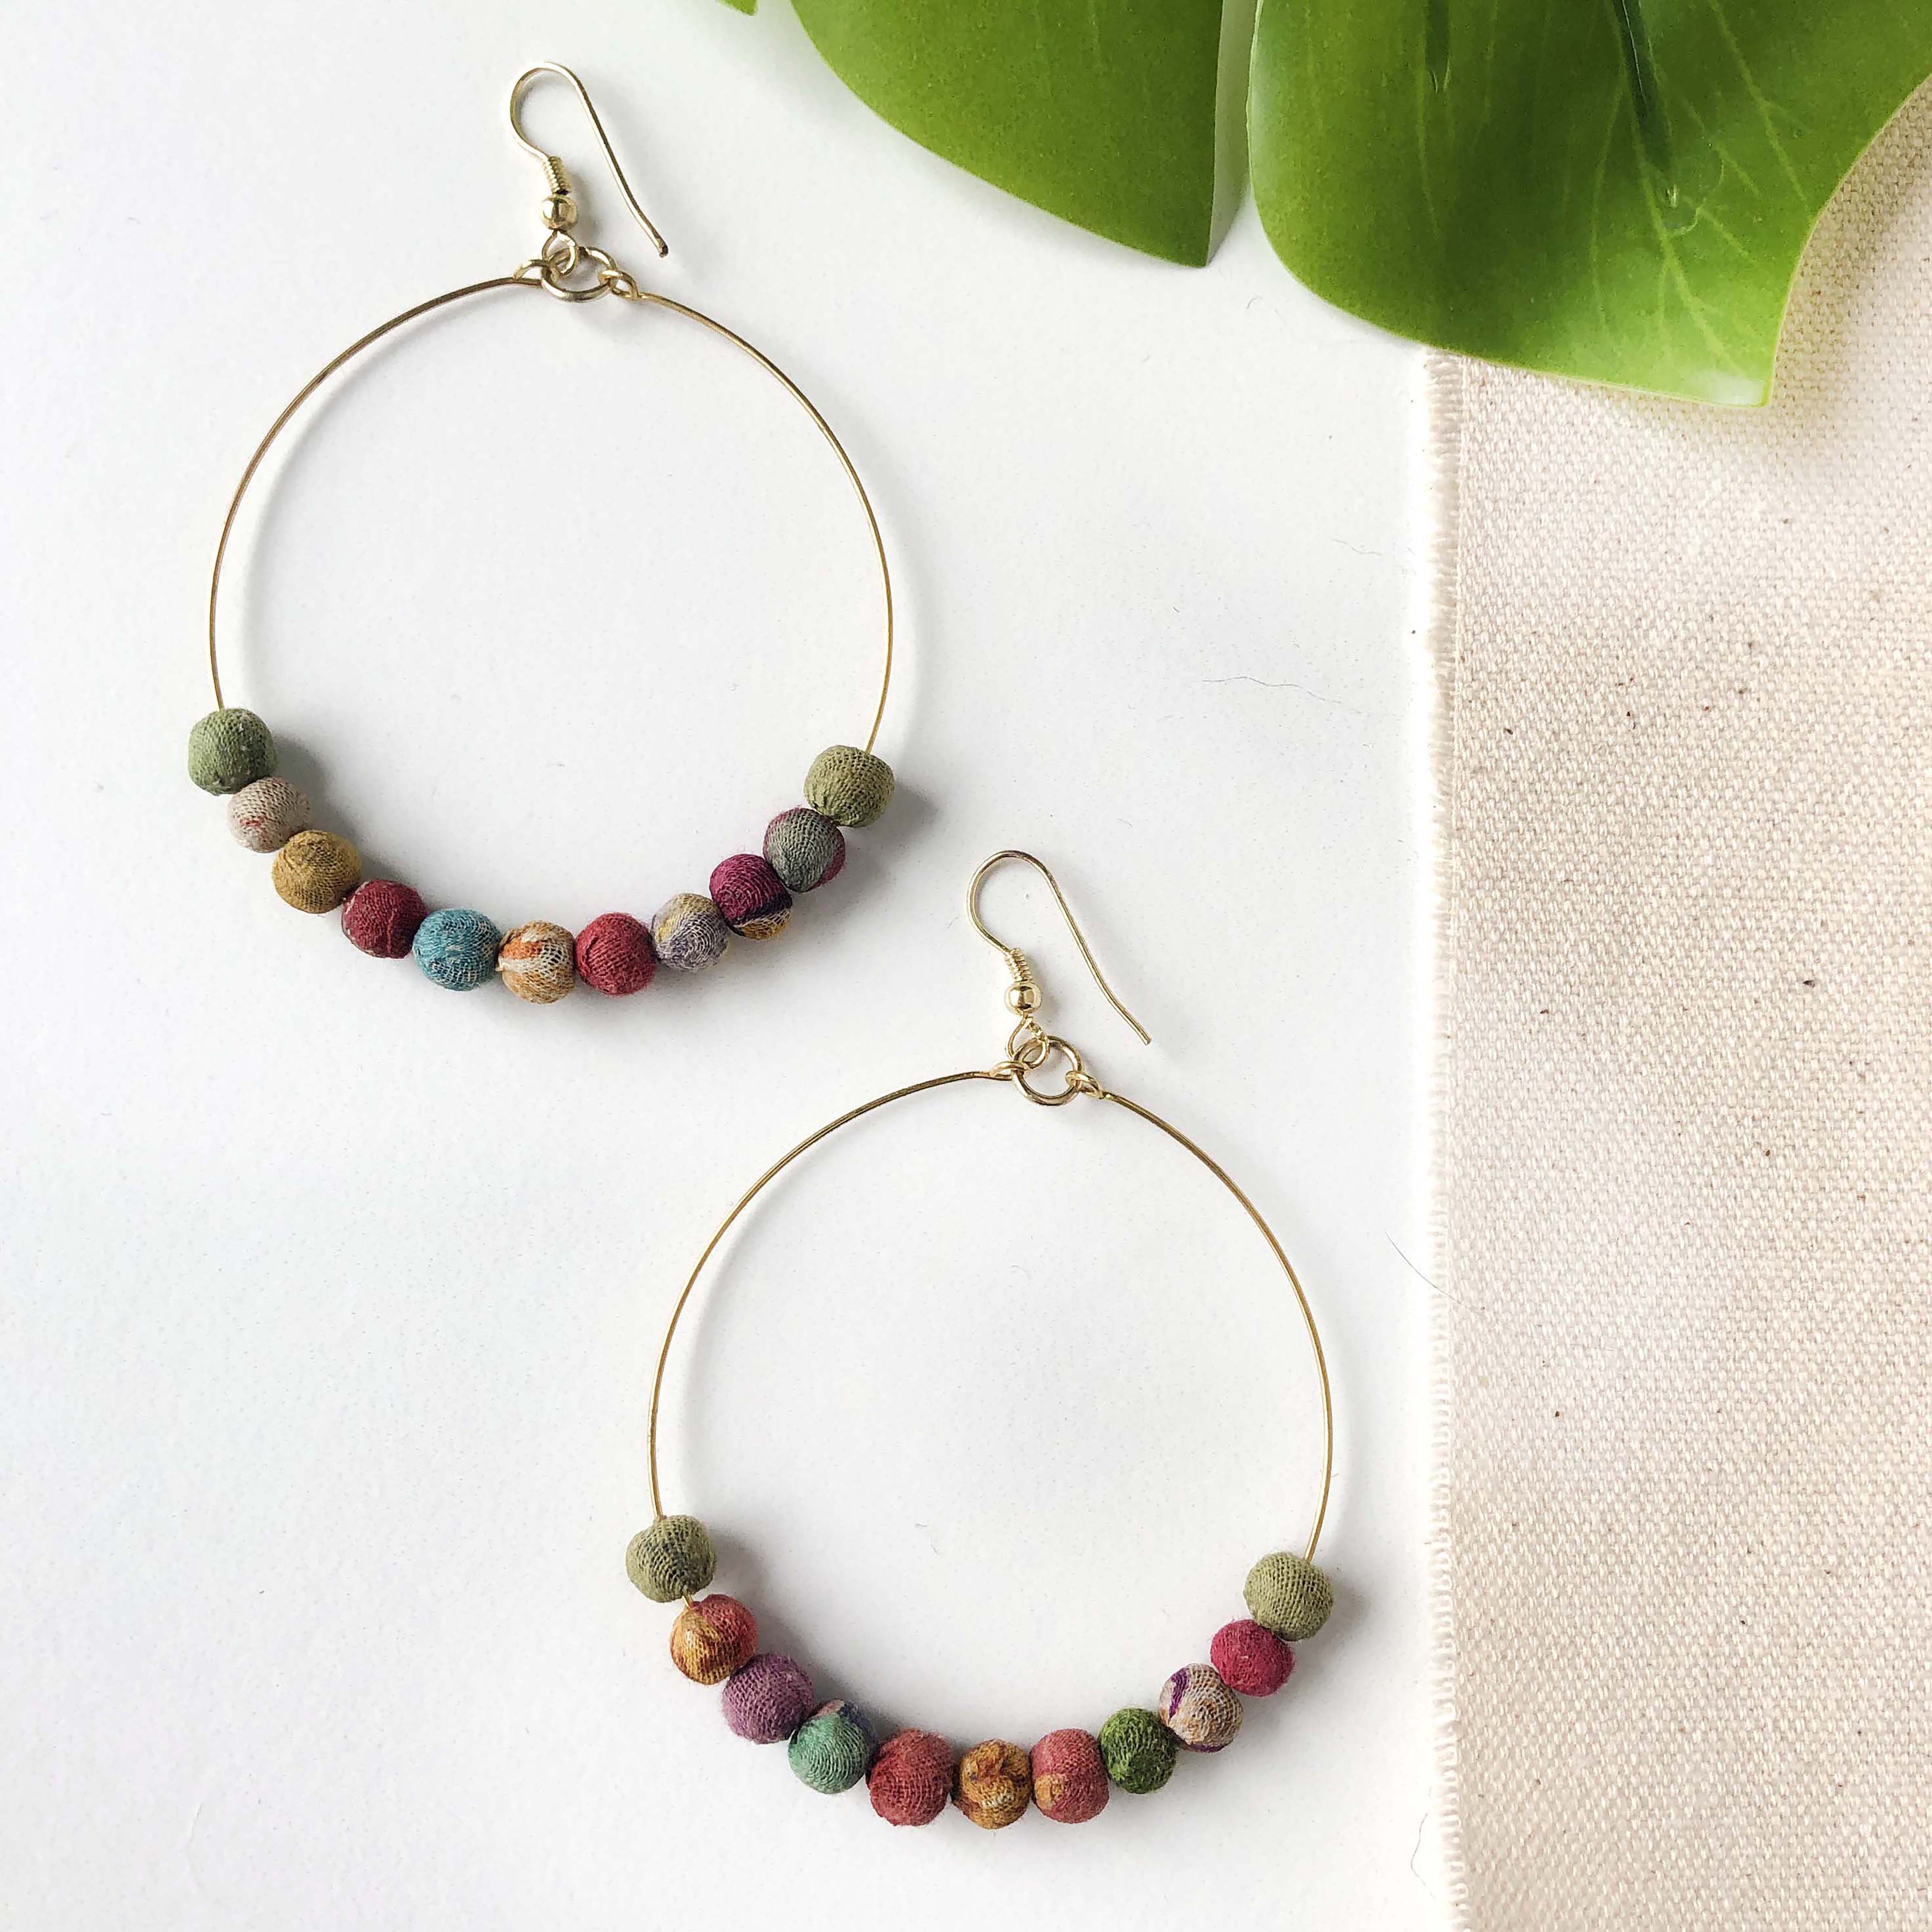 A pair of hoop earrings with eleven textile-wrapped beads threaded through the hoop.